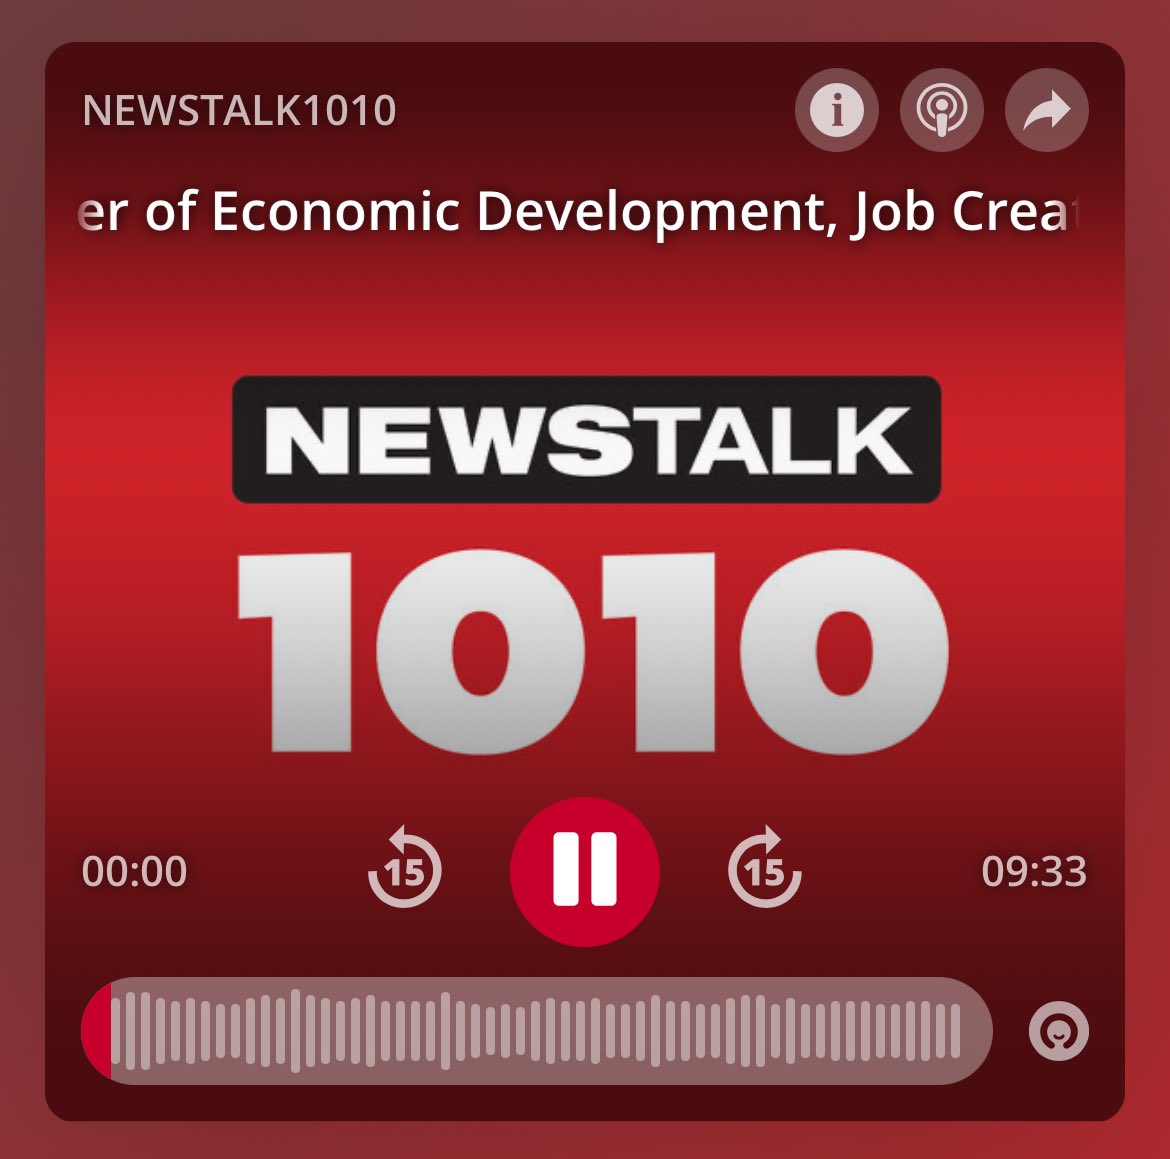 Spoke with @MooreintheAM on @NEWSTALK1010 to discuss @HondaJP’s $15B investment in Ontario to create the nation’s first comprehensive #EV supply chain. This project will see the construction of 4 new manufacturing plants, securing thousands of good jobs. omny.fm/shows/newstalk…